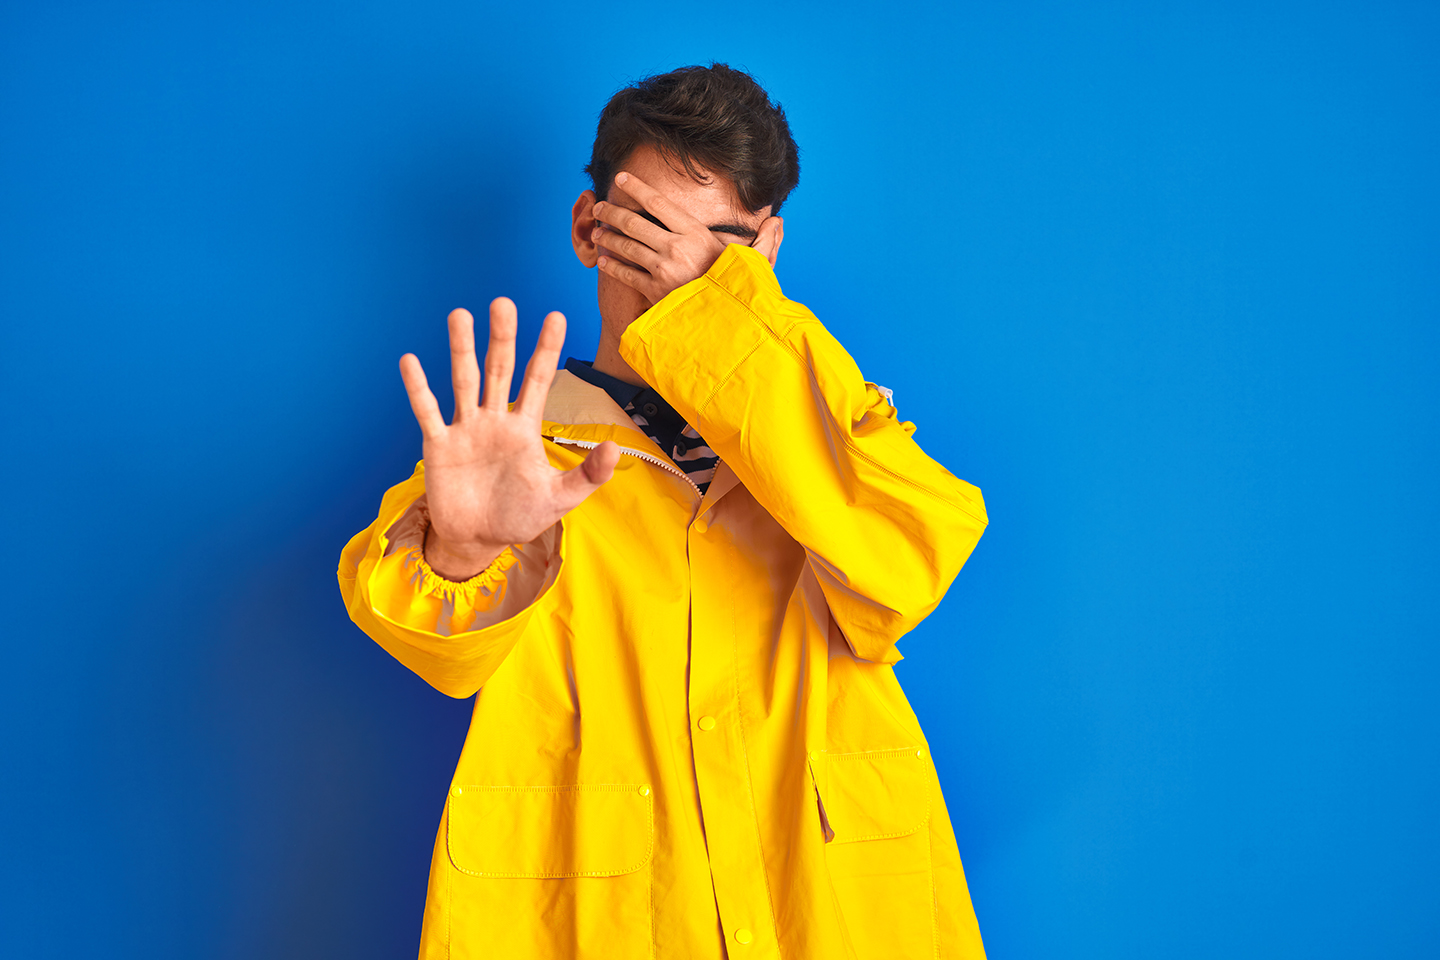 A young man in a yellow fisherman's jacket holding one hand to his face and the other out to the camera